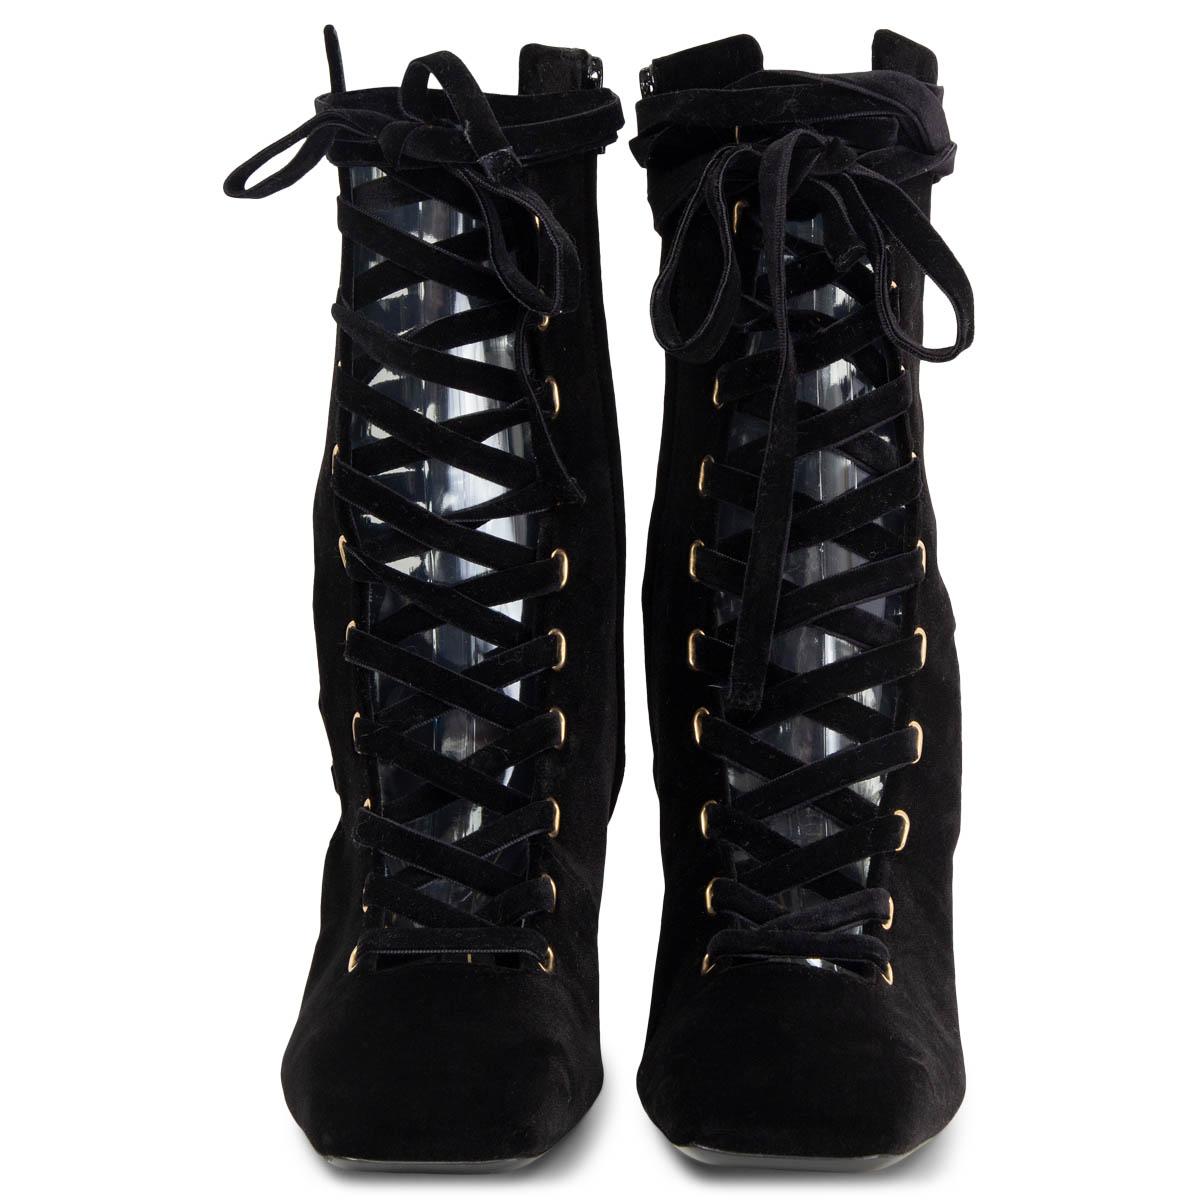 100% authentic Zimmermann lace-up ankle-boots in black plush black velvet with a square-toe design and lace-up sides featuring a square block-heel. The inner side zipper makes them easy to slip on and off. Brand new. 

Measurements
Imprinted